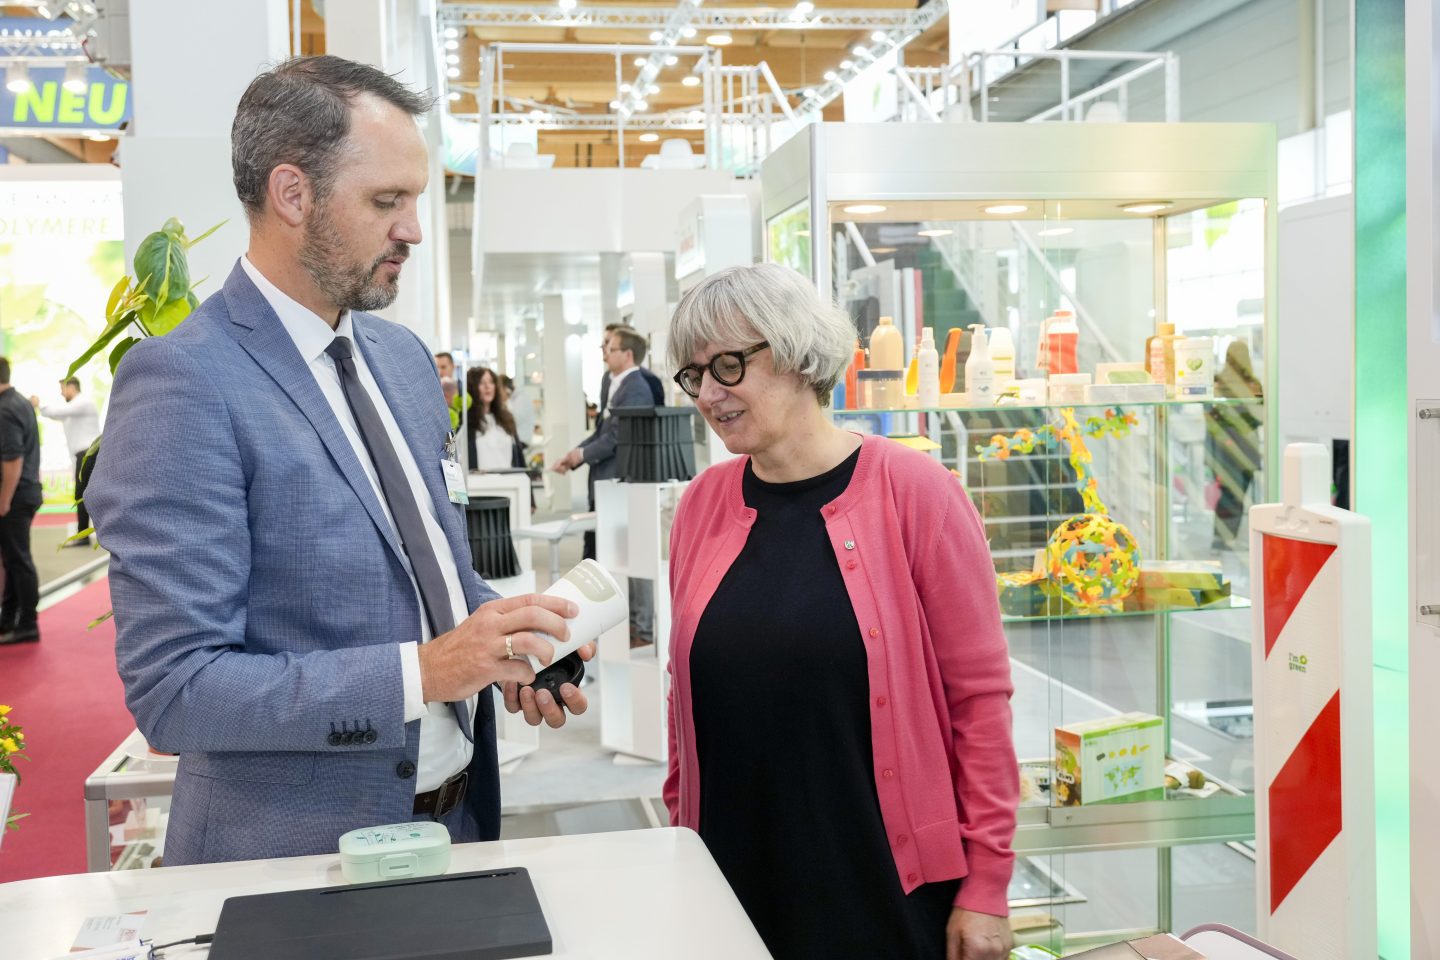 Silke Krebs, State Secretary in the Ministry of Economic Affairs, Innovation, Digitalisation and Energy of the State of North Rhine-Westphalia, obtained first-hand information about sustainable and recycled plastics from our sales representative Niklas Voß.